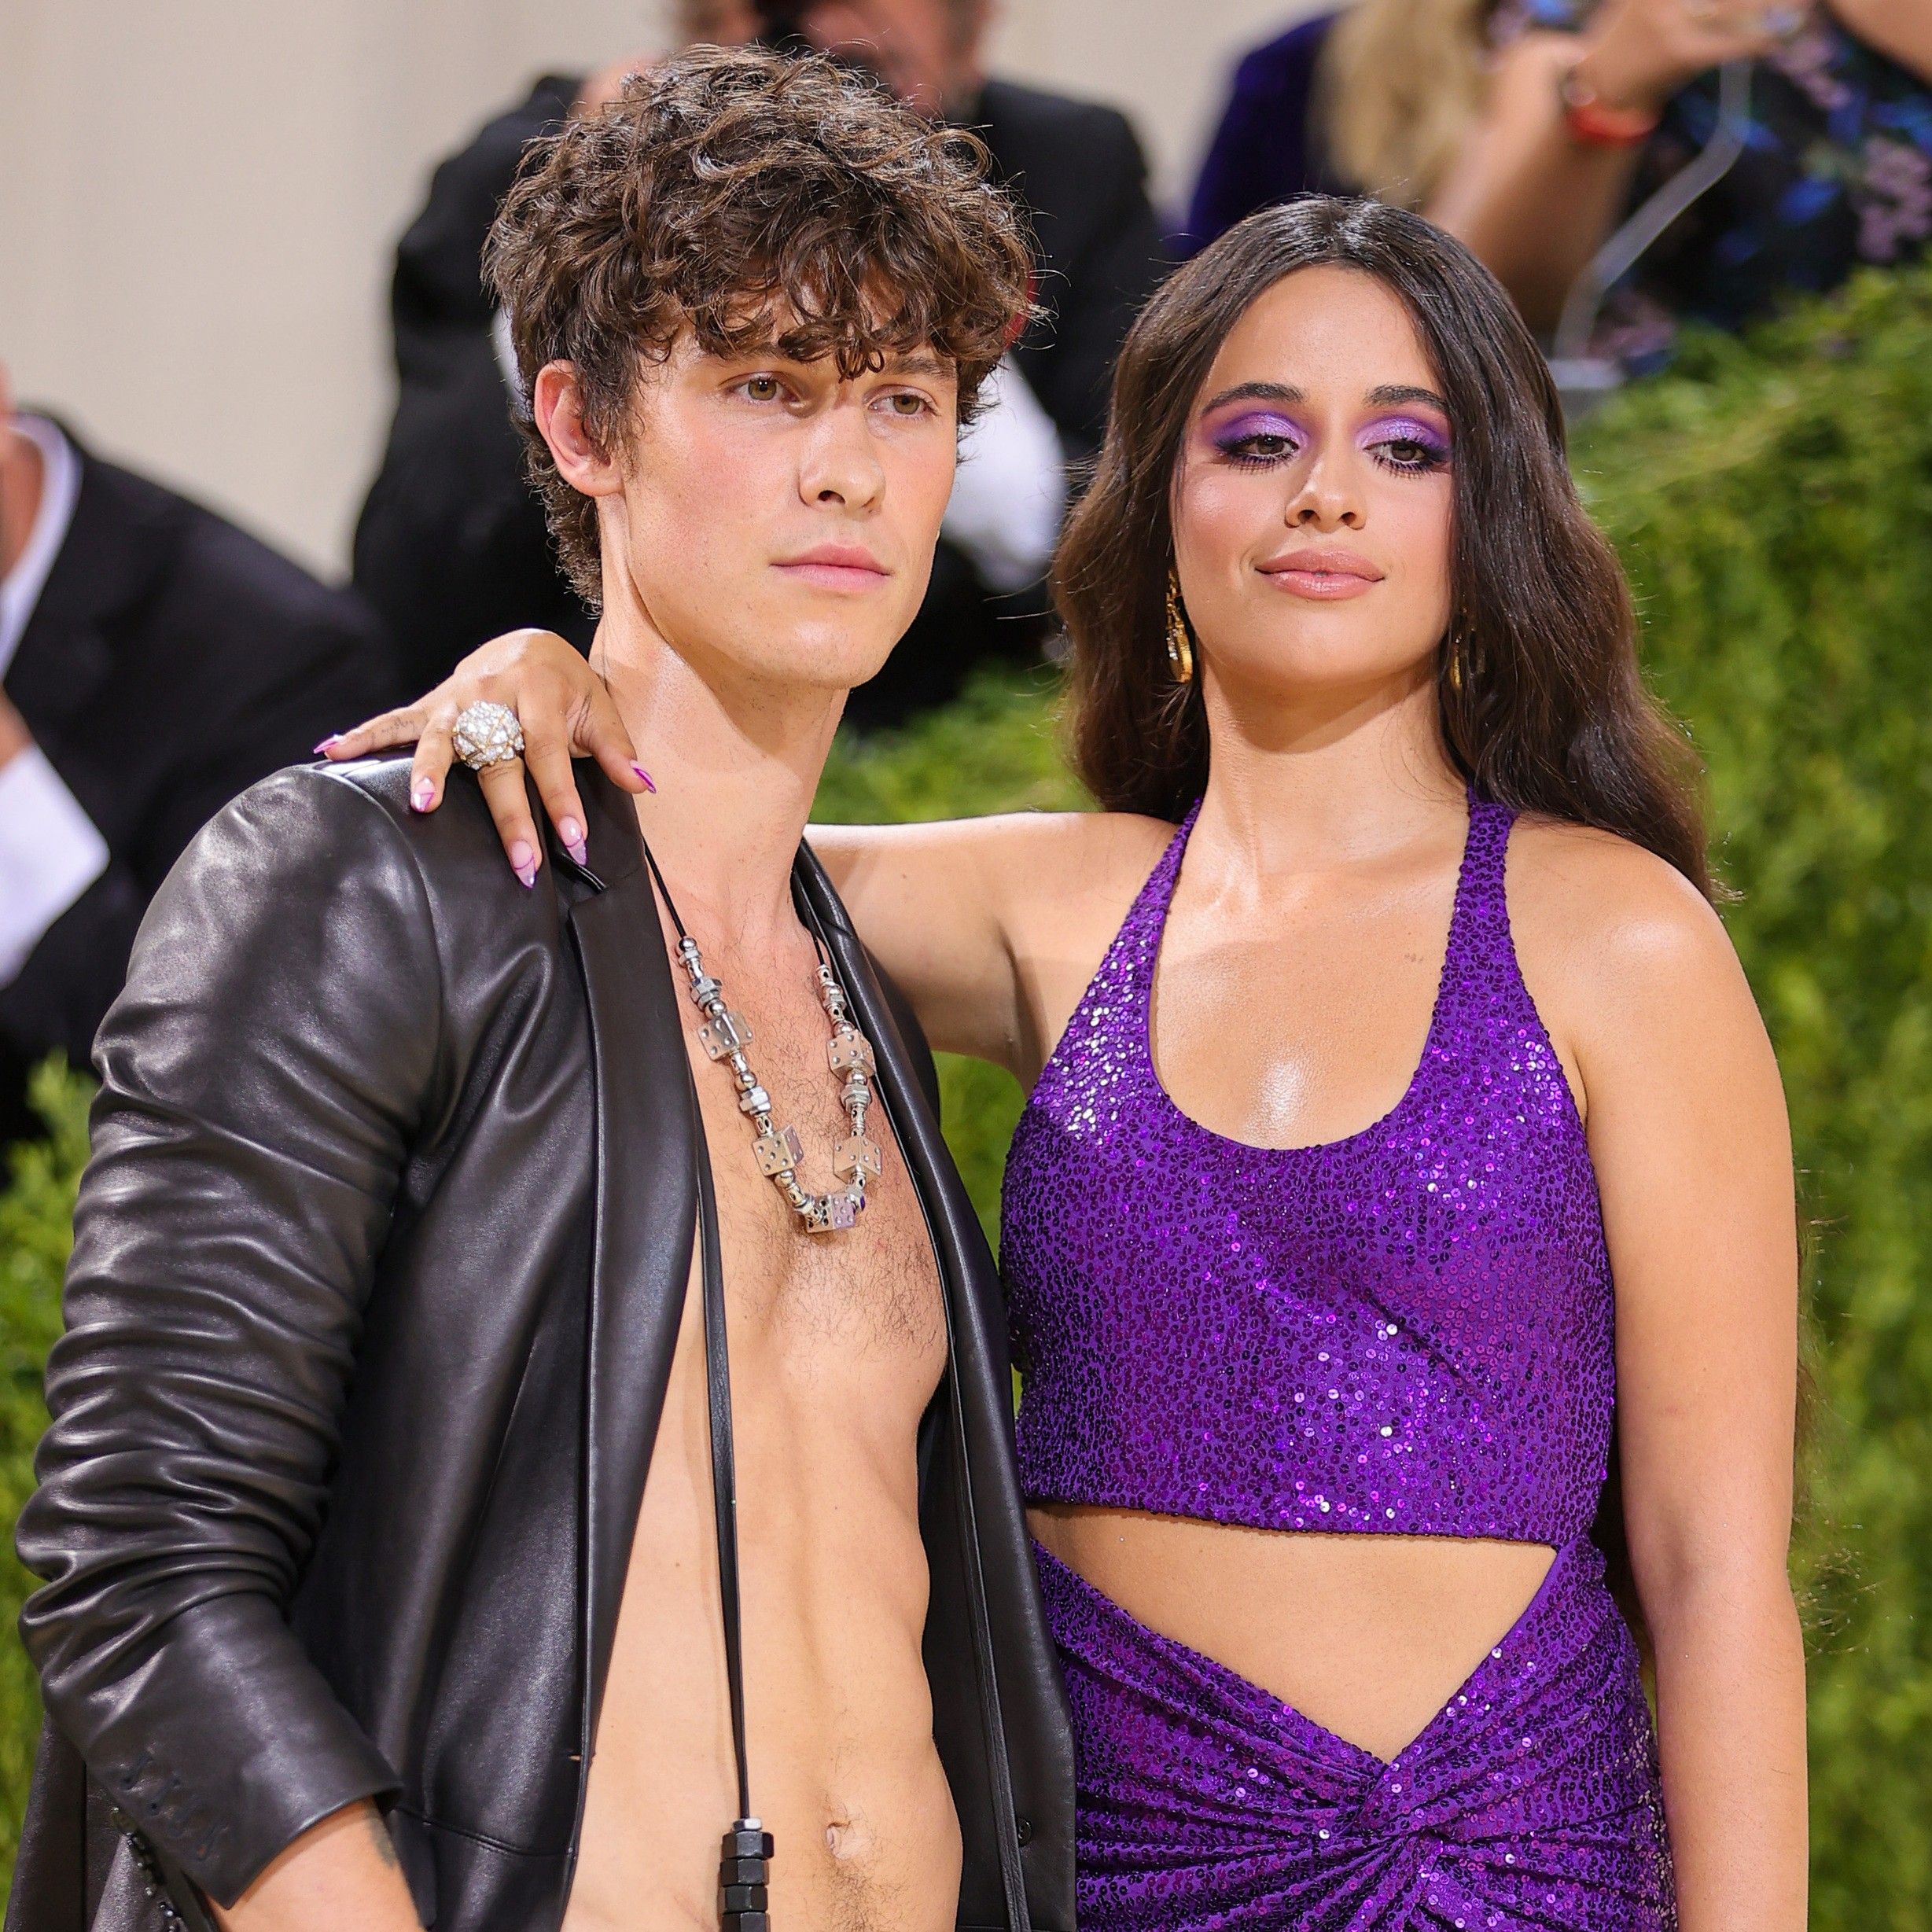 Shawn Mendes And Camila Cabello at the 2021 met gala